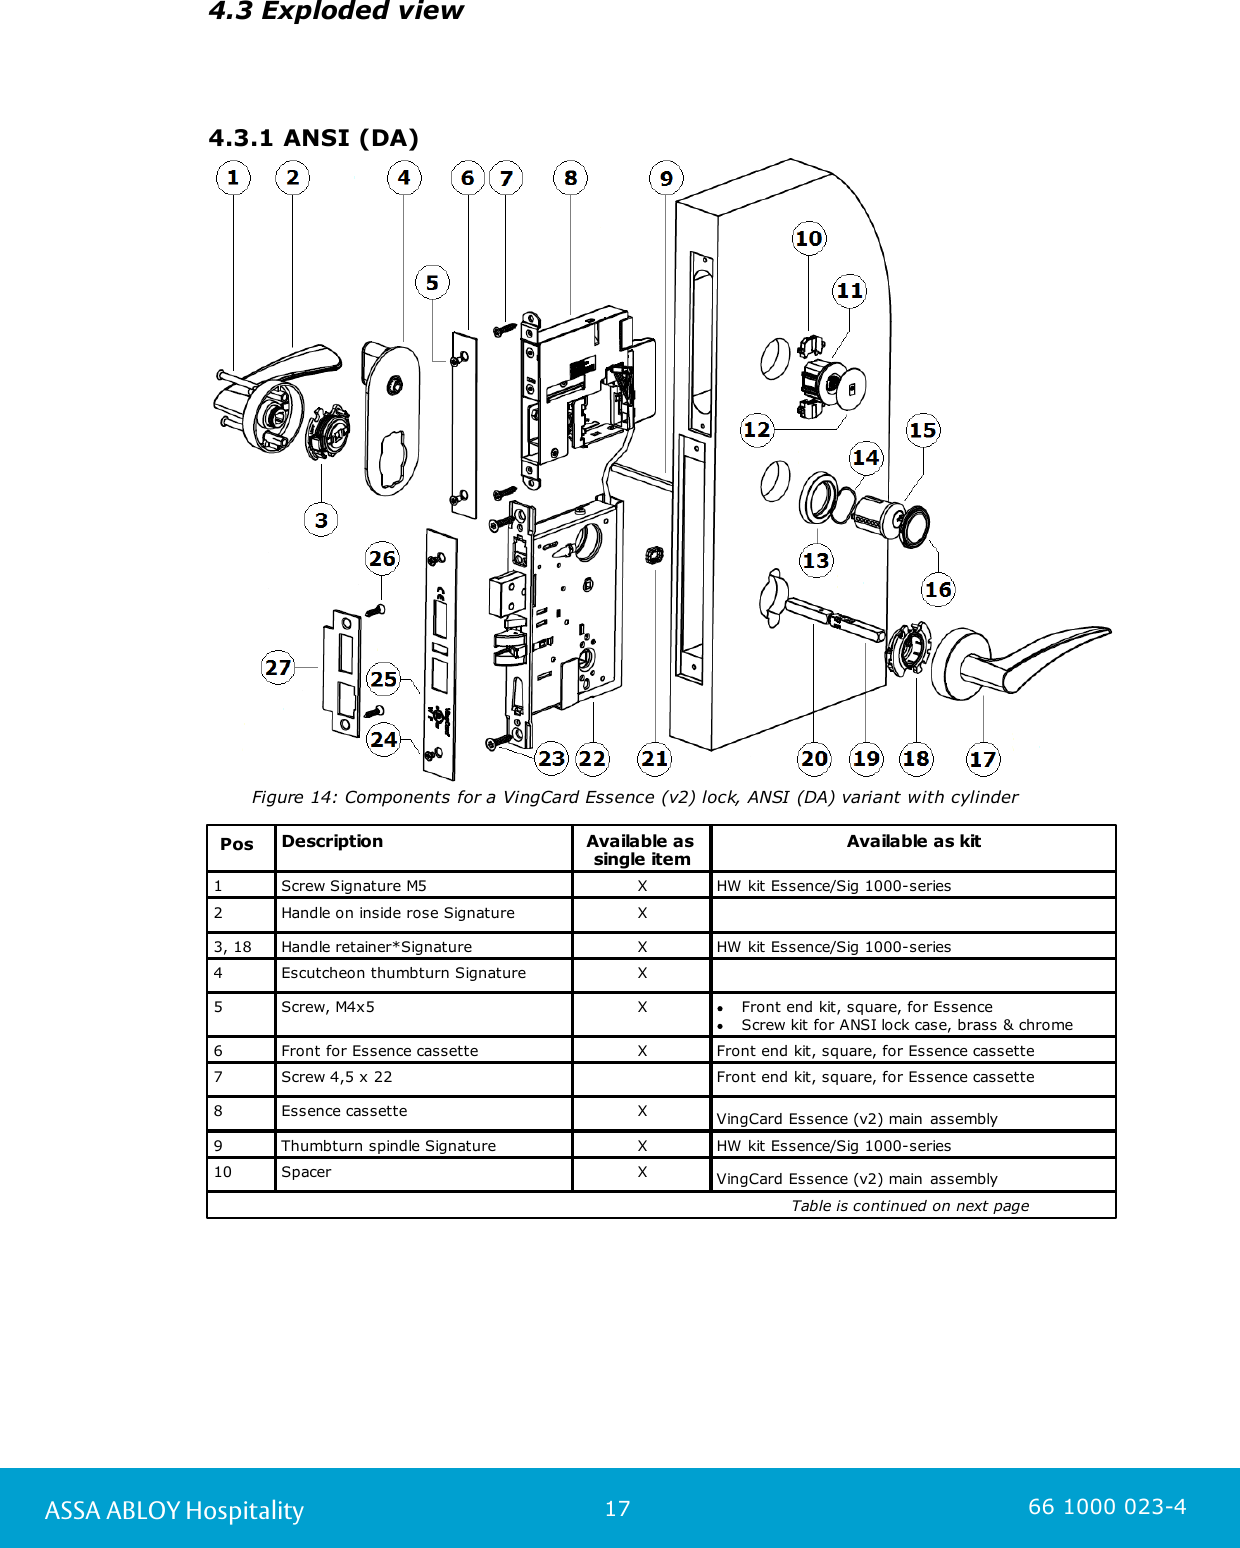 17ASSA ABLOY Hospitality 66 1000 023-44.3 Exploded view4.3.1 ANSI (DA)      Figure 14: Components for a VingCard Essence (v2) lock, ANSI (DA) variant with cylinder PosDescriptionAvailable as single itemAvailable as kit1Screw Signature M5 XHW kit Essence/Sig 1000-series2Handle on inside rose Signature X3, 18Handle retainer*Signature XHW kit Essence/Sig 1000-series4Escutcheon thumbturn SignatureX5Screw, M4x5XFront end kit, square, for Essence Screw kit for ANSI lock case, brass &amp; chrome6Front for Essence cassetteXFront end kit, square, for Essence cassette7Screw 4,5 x 22Front end kit, square, for Essence cassette8Essence cassette XVingCard Essence (v2) main assembly9Thumbturn spindle SignatureXHW kit Essence/Sig 1000-series10SpacerXVingCard Essence (v2) main assembly                                                                                                               Table is continued on next page